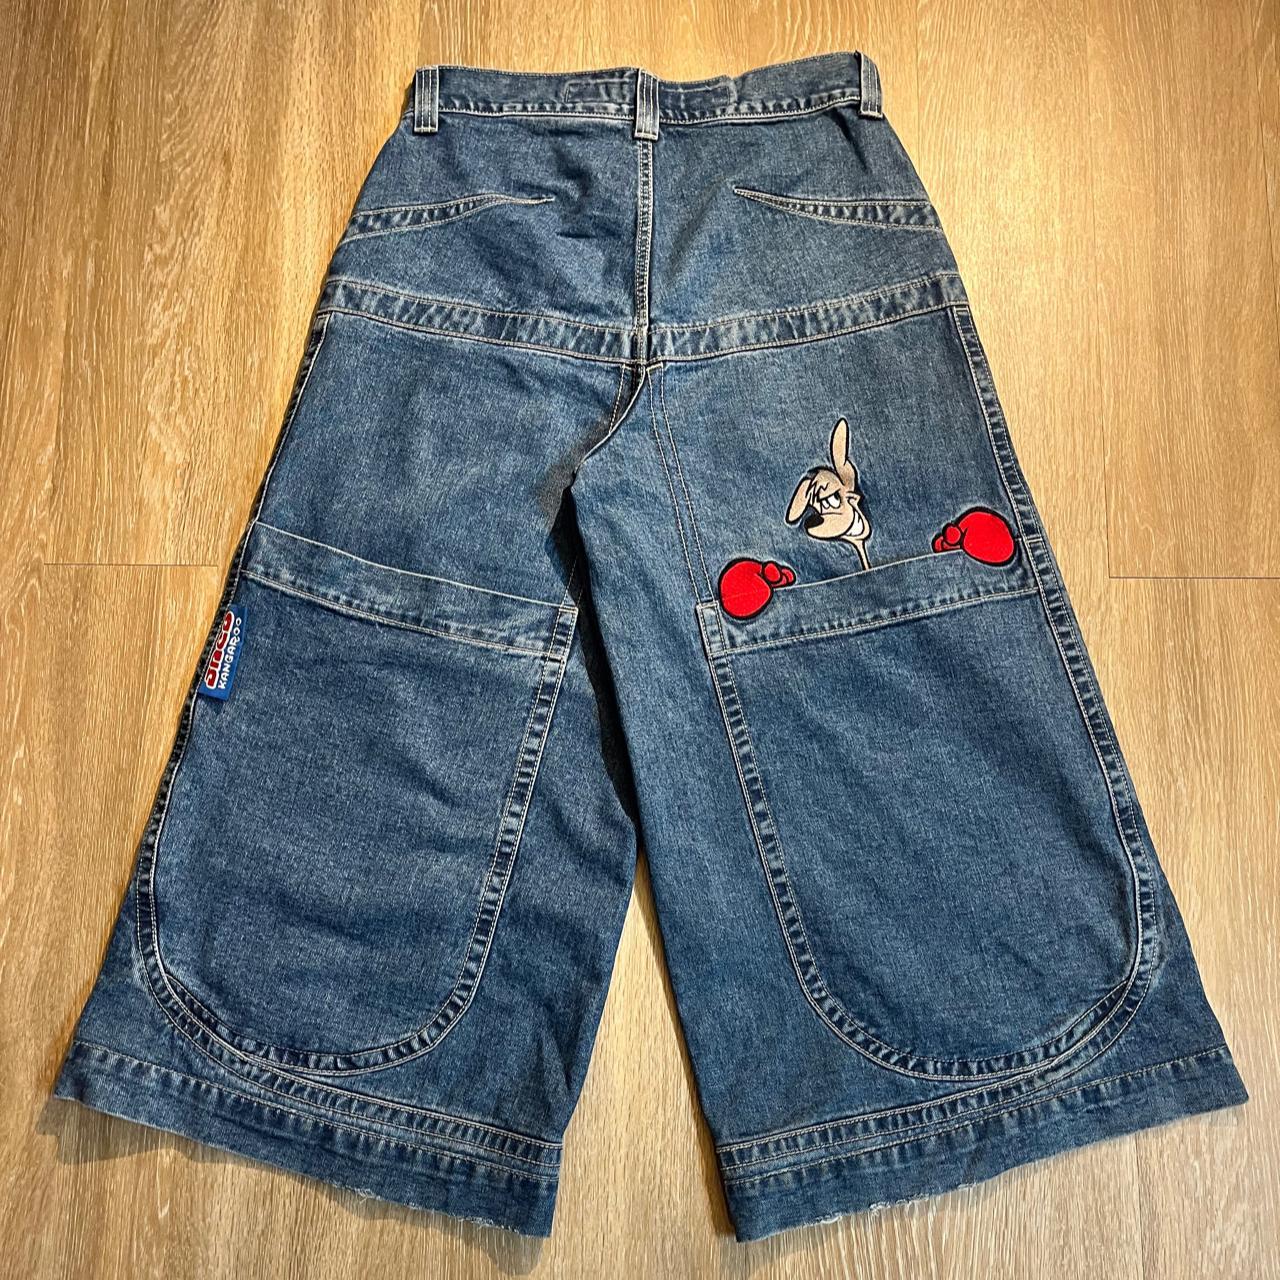 Kangaroo jnco jeans in such good condition these are... - Depop